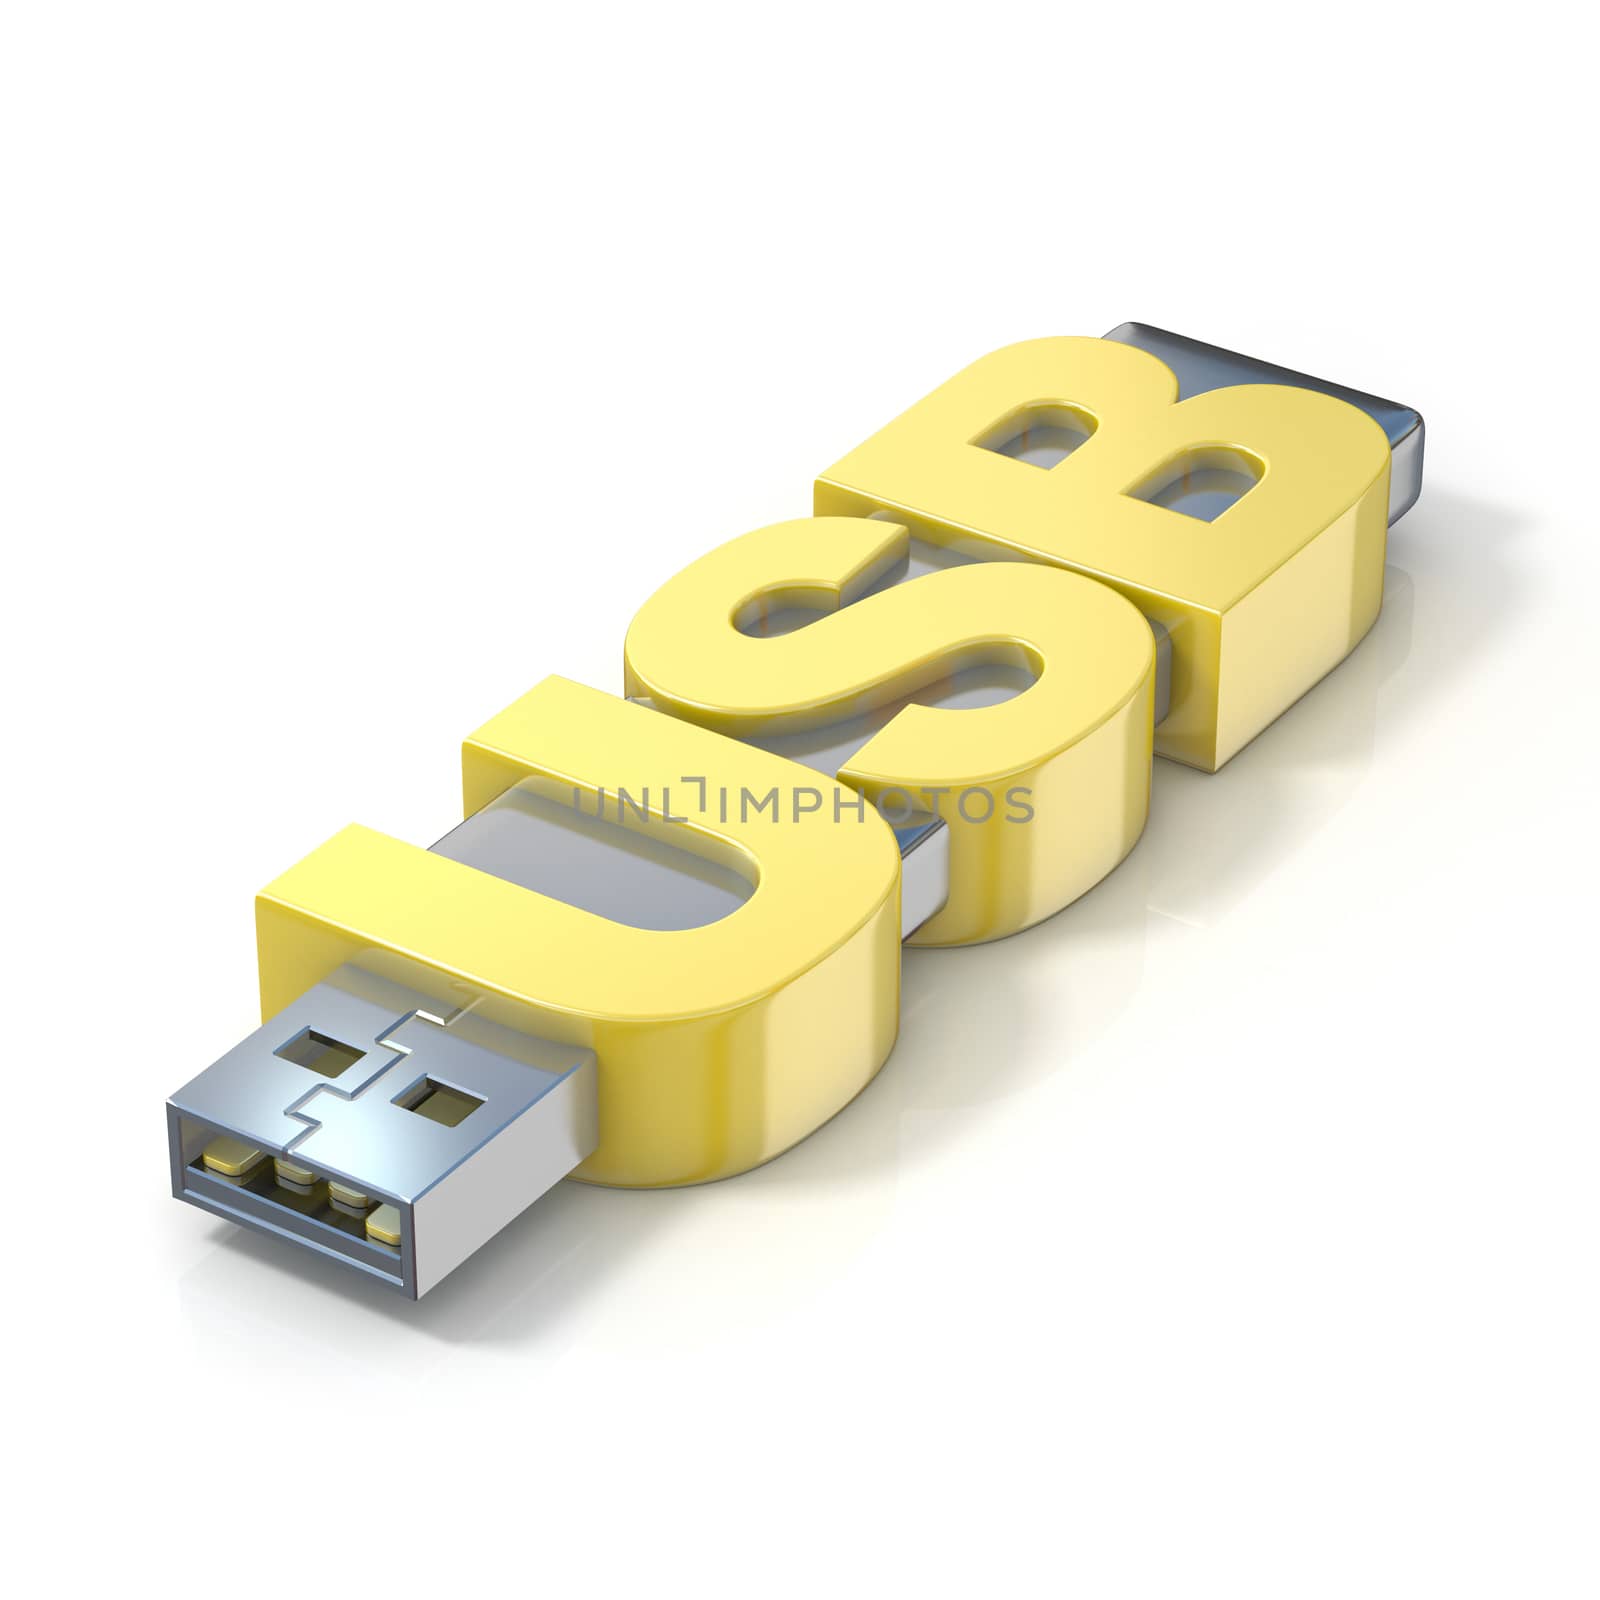 USB flash memory, made with the word USB. 3D by djmilic